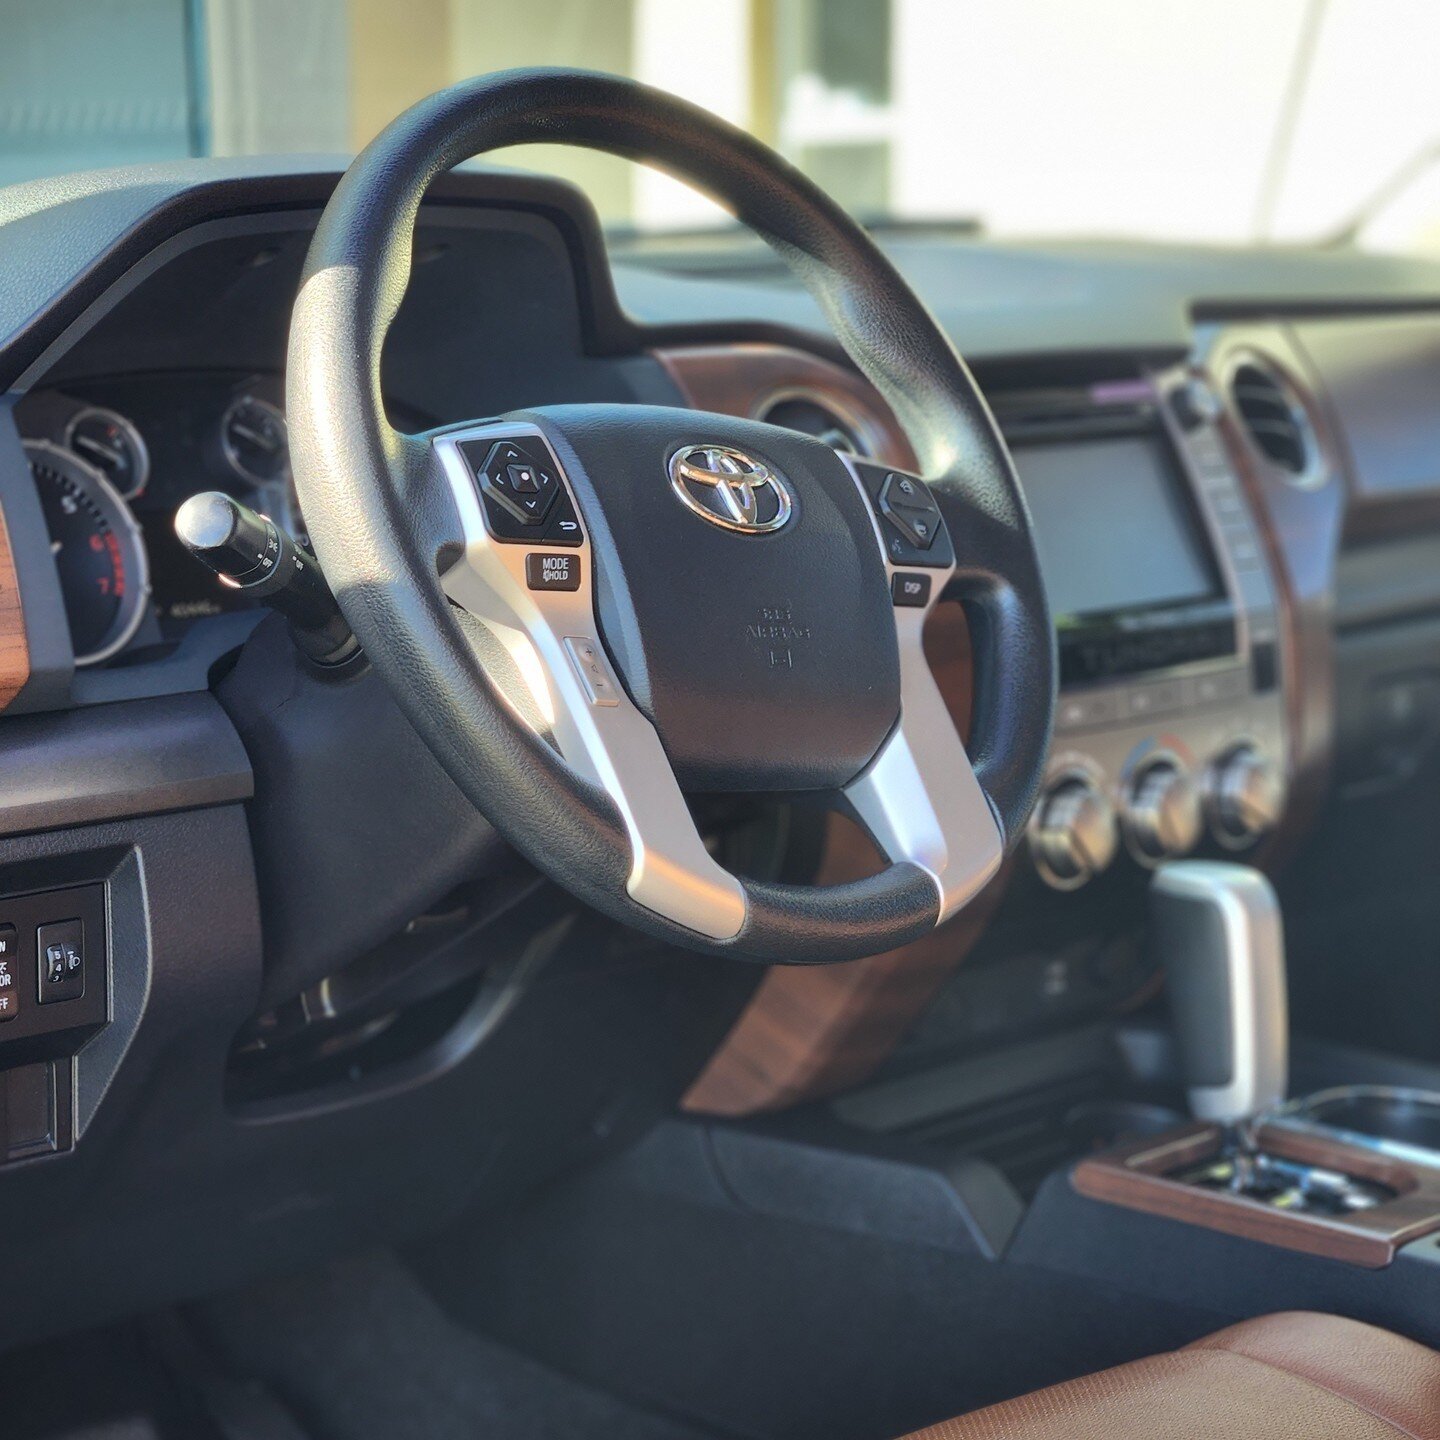 Did you know that shampooing your car's interior is just as important as detailing the exterior? 
A clean and fresh smelling car is essential for a good first impression. Schedule an appointment with EPIK Mobile Car Detailing today and we'll take car